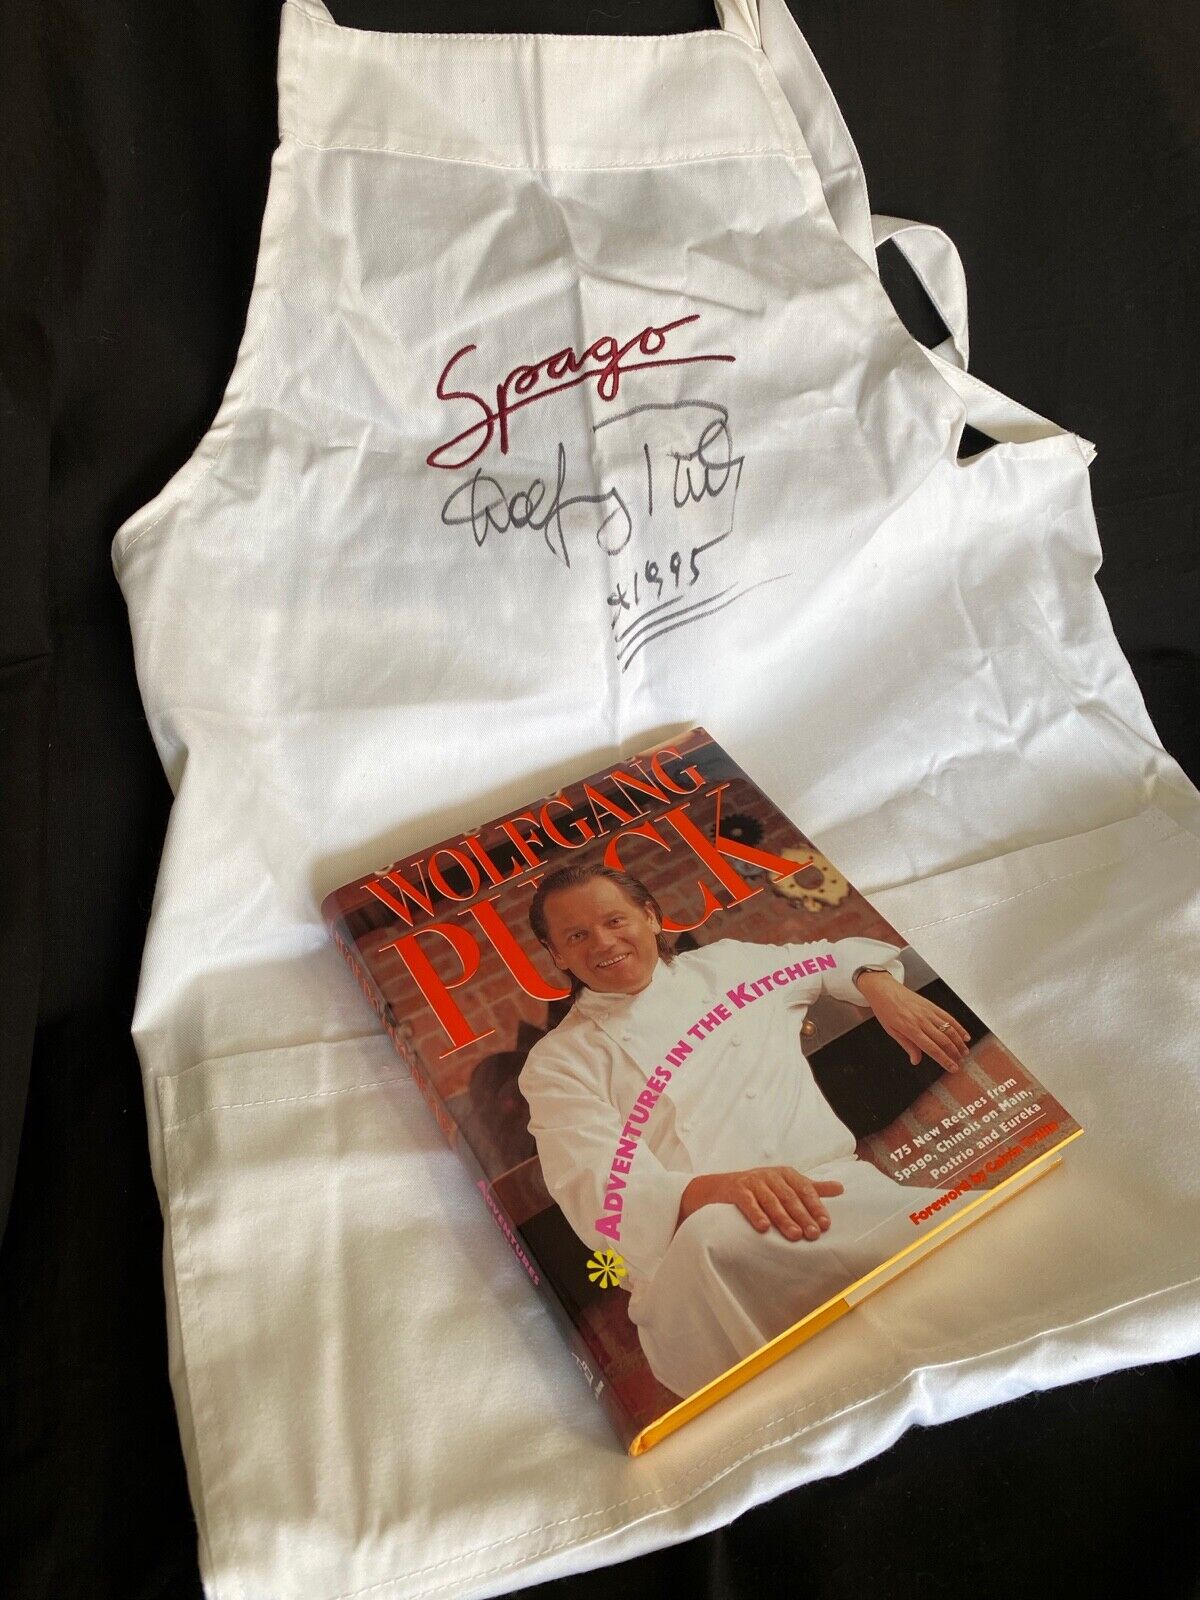 WOLFGANG PUCK SIGNED "SPAGO" APRON + "ADVENTURES IN THE KITCHEN" BOOK Без бренда - фотография #12